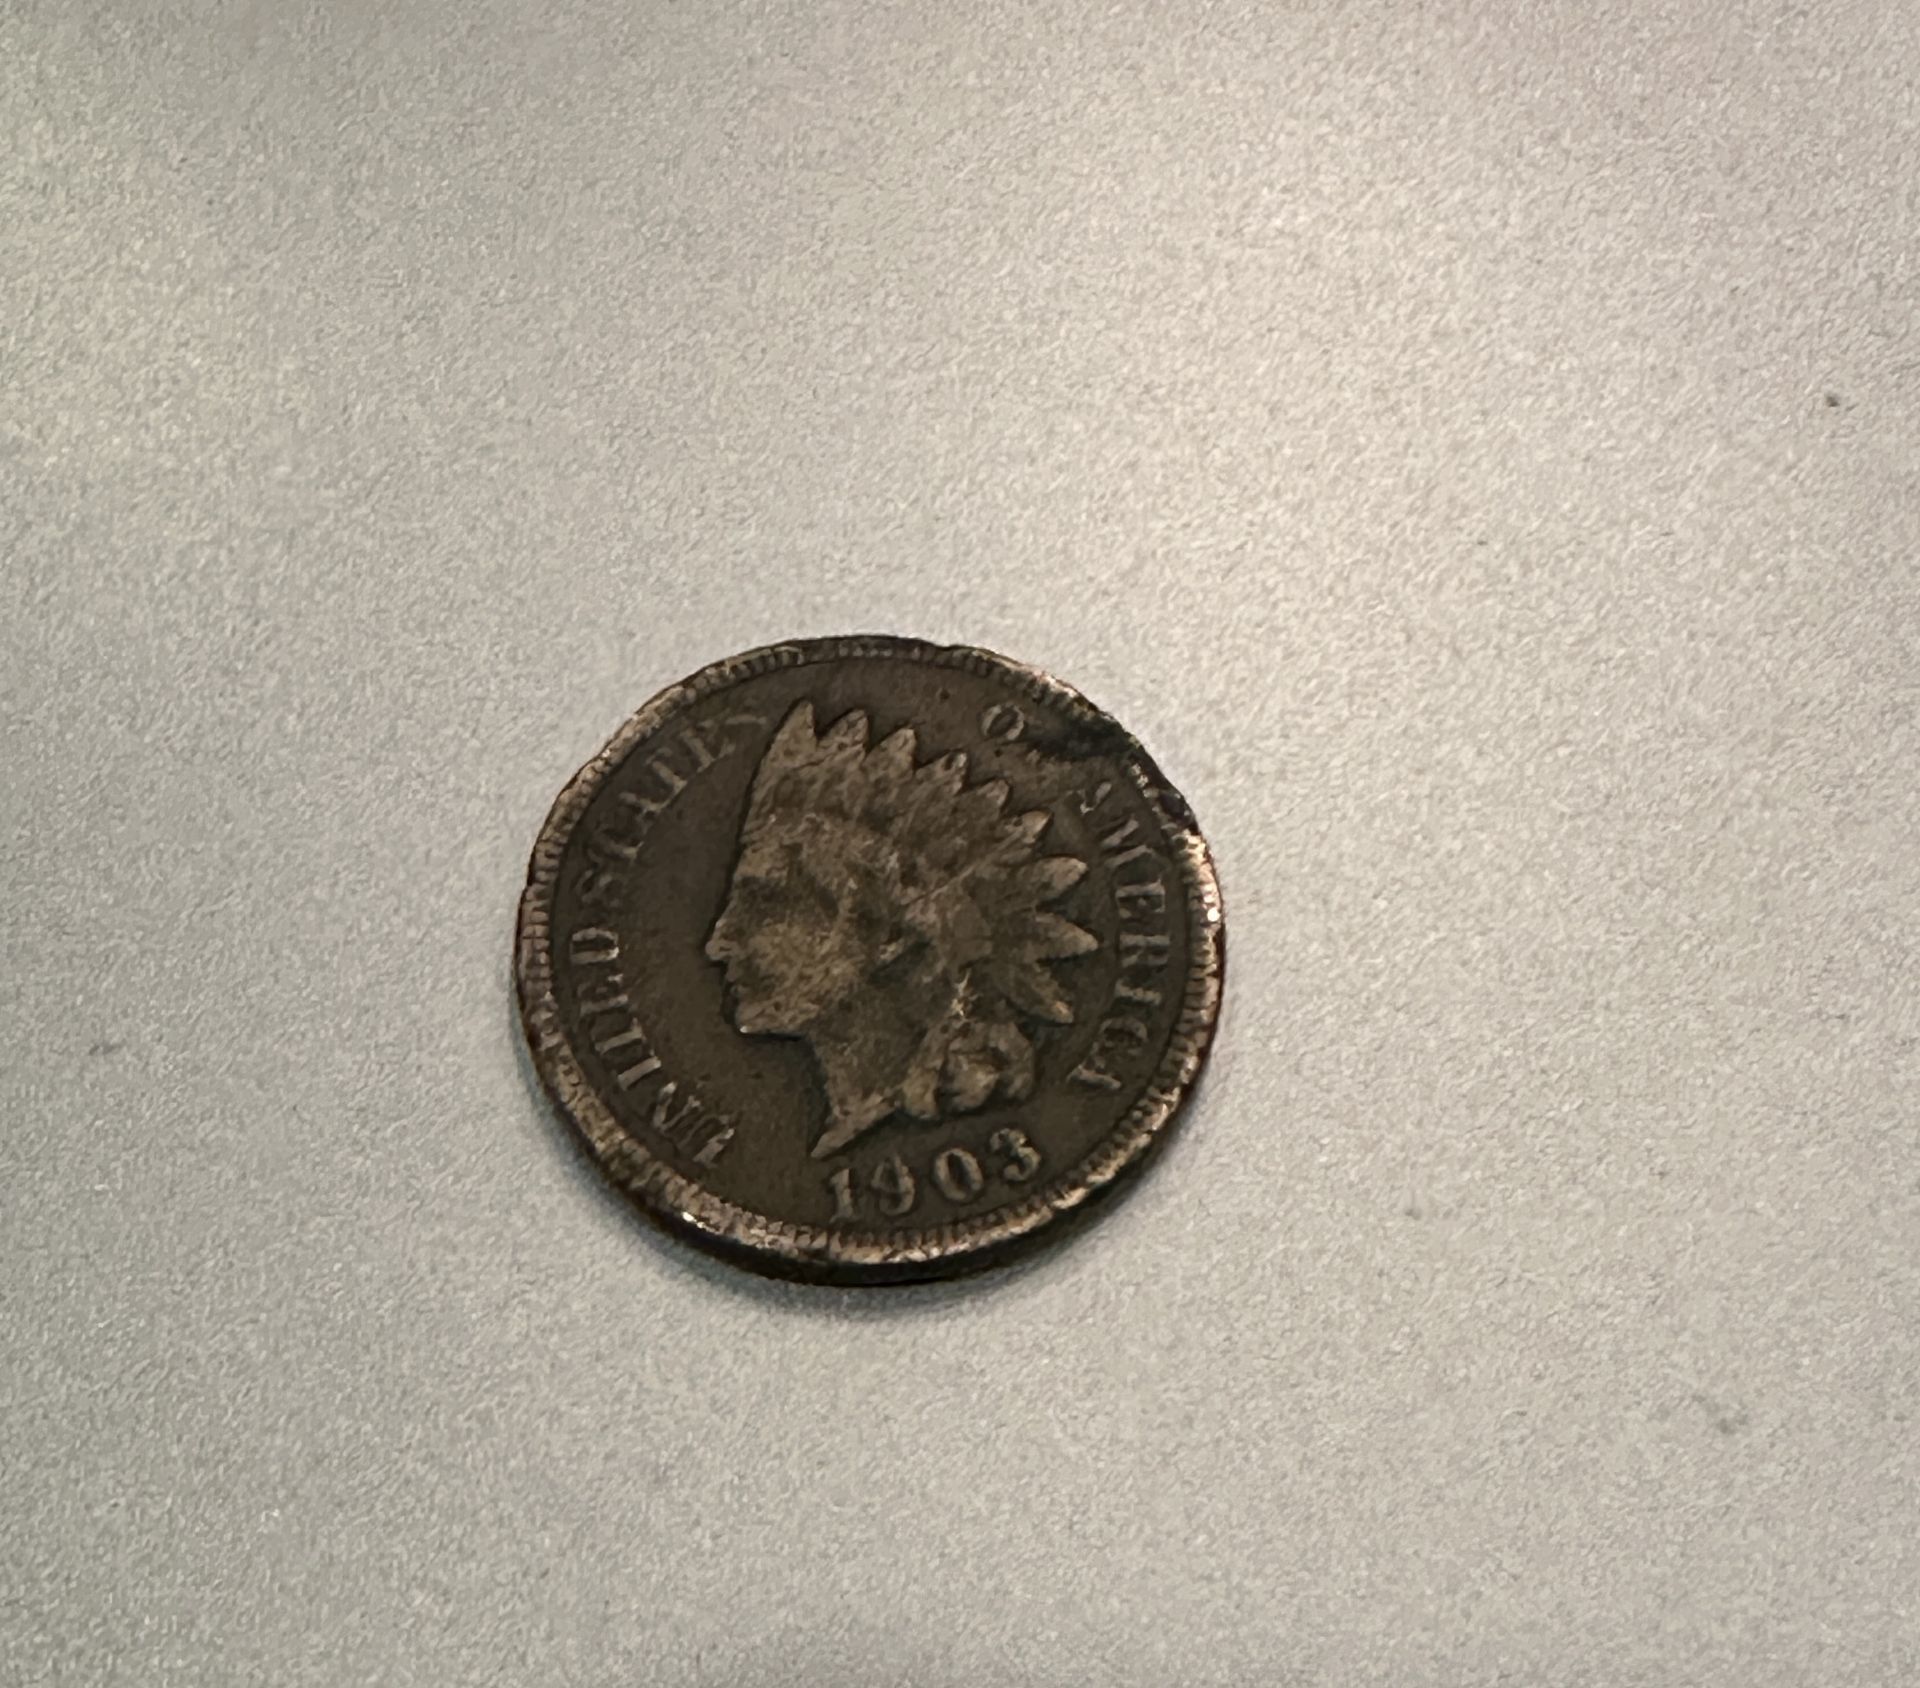 1903 Indian Head Cent, Bronze, Old Rare Antique - Image 2 of 2